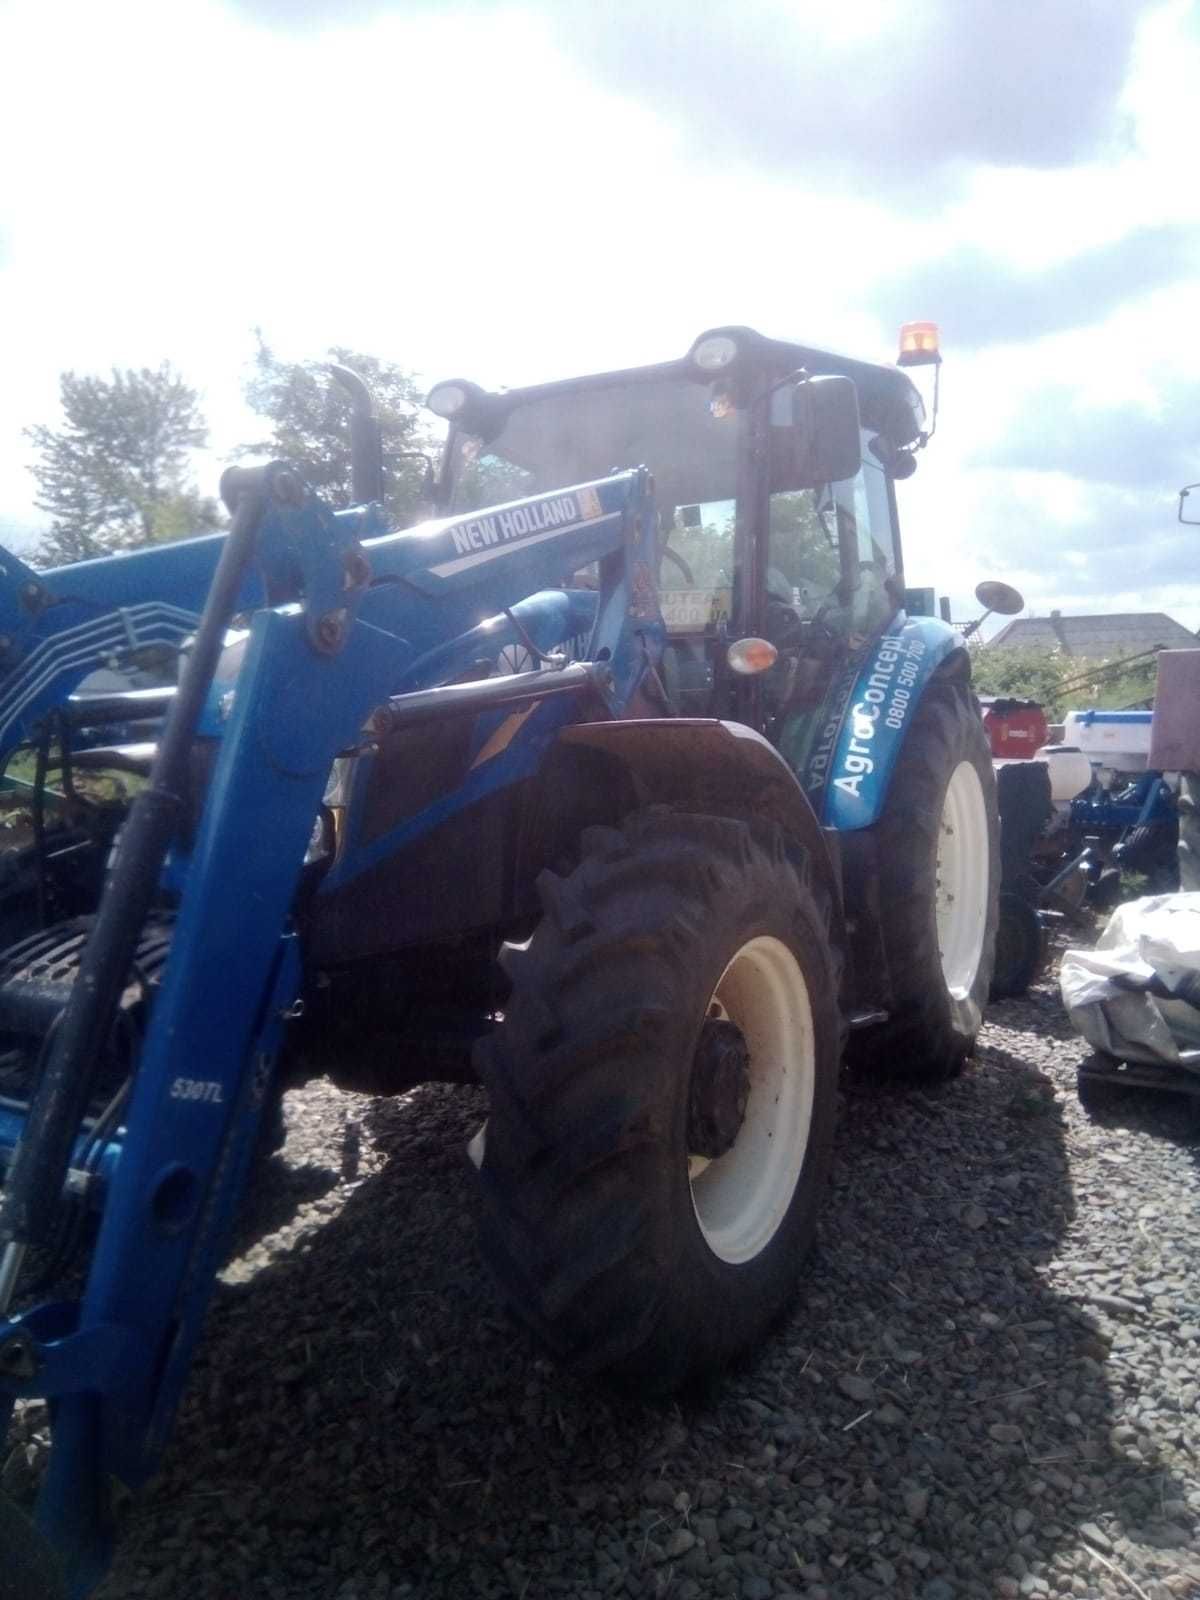 Tractor New Holland 115CP Iasi